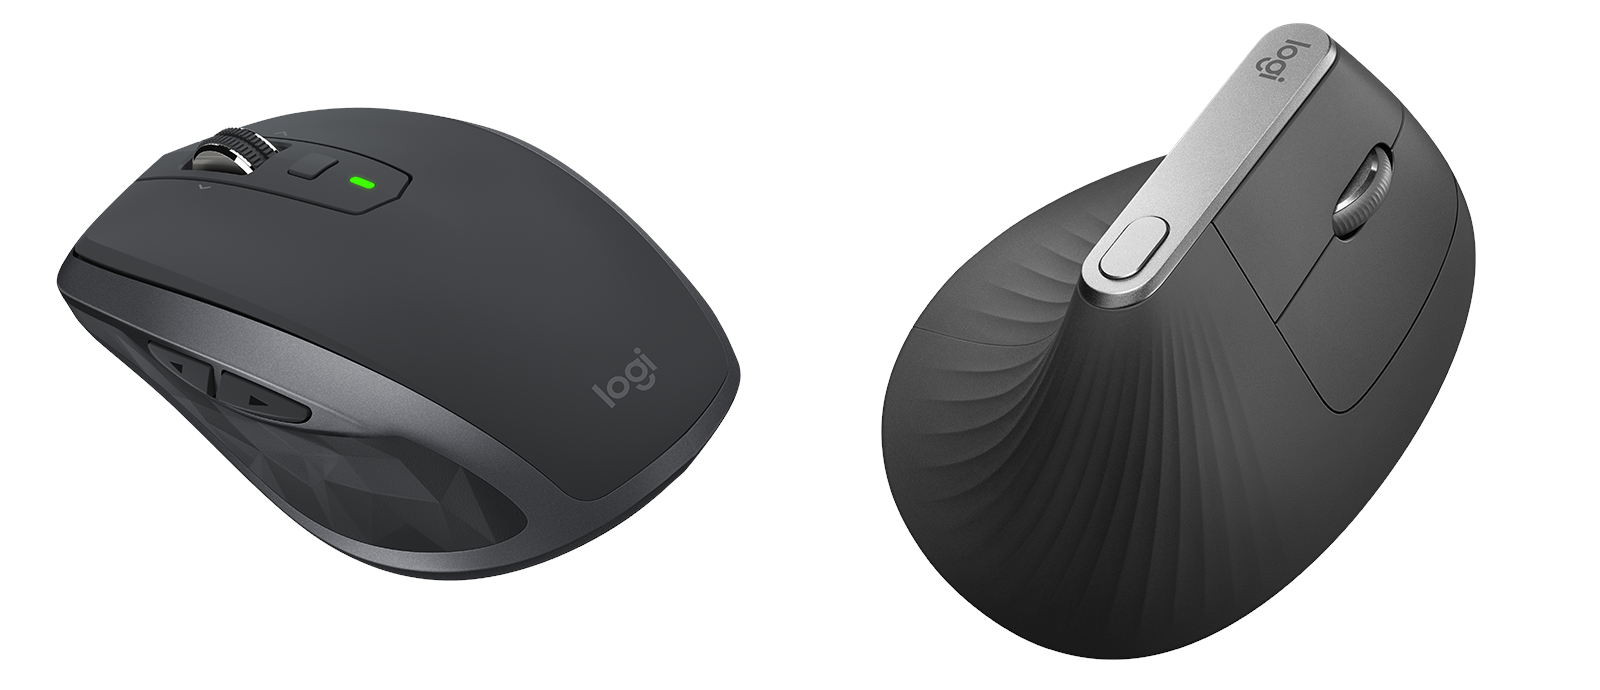 Hands-On: Logitech MX Vertical and MX Anywhere 2S Mice